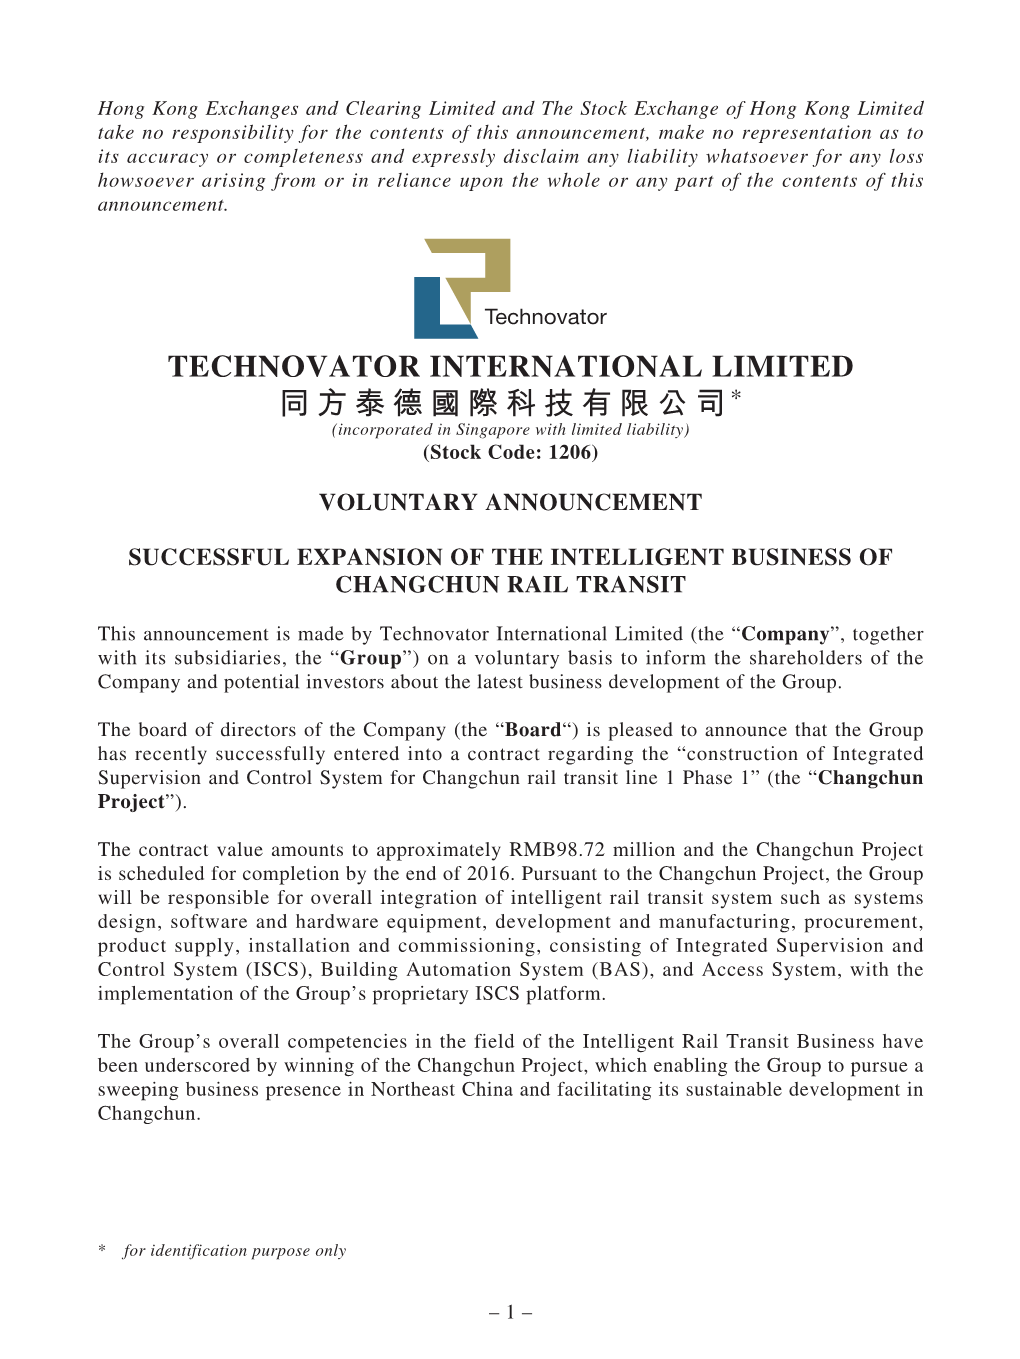 TECHNOVATOR INTERNATIONAL LIMITED 同方泰德國際科技有限公司* (Incorporated in Singapore with Limited Liability) (Stock Code: 1206)